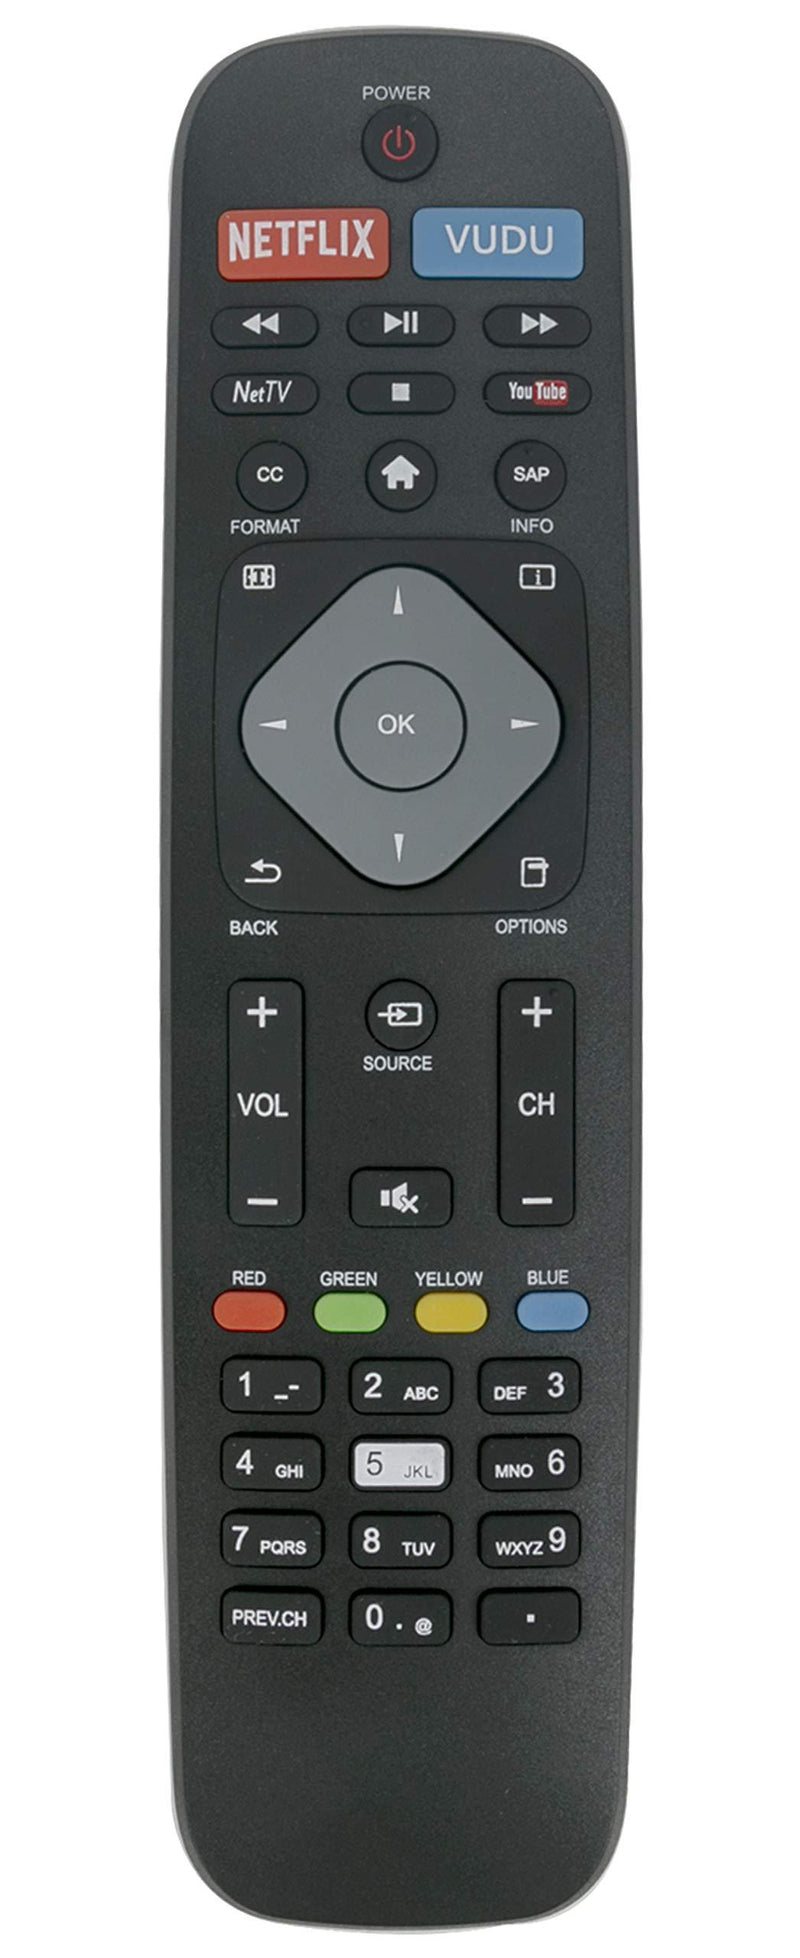 VINABTY Replaced TV Remote fit for Philips 4K Ultra HD Smart LED TV 32PFL4902/F7 40PFL4901/F7 43PFL4901/F7 43PFL4902/F7 43PFL5602/F7 50PFL4901/F7 50PFL4901/F7 50PFL5601/F7 50PFL5602/F7 50PFL5603/F7 - LeoForward Australia